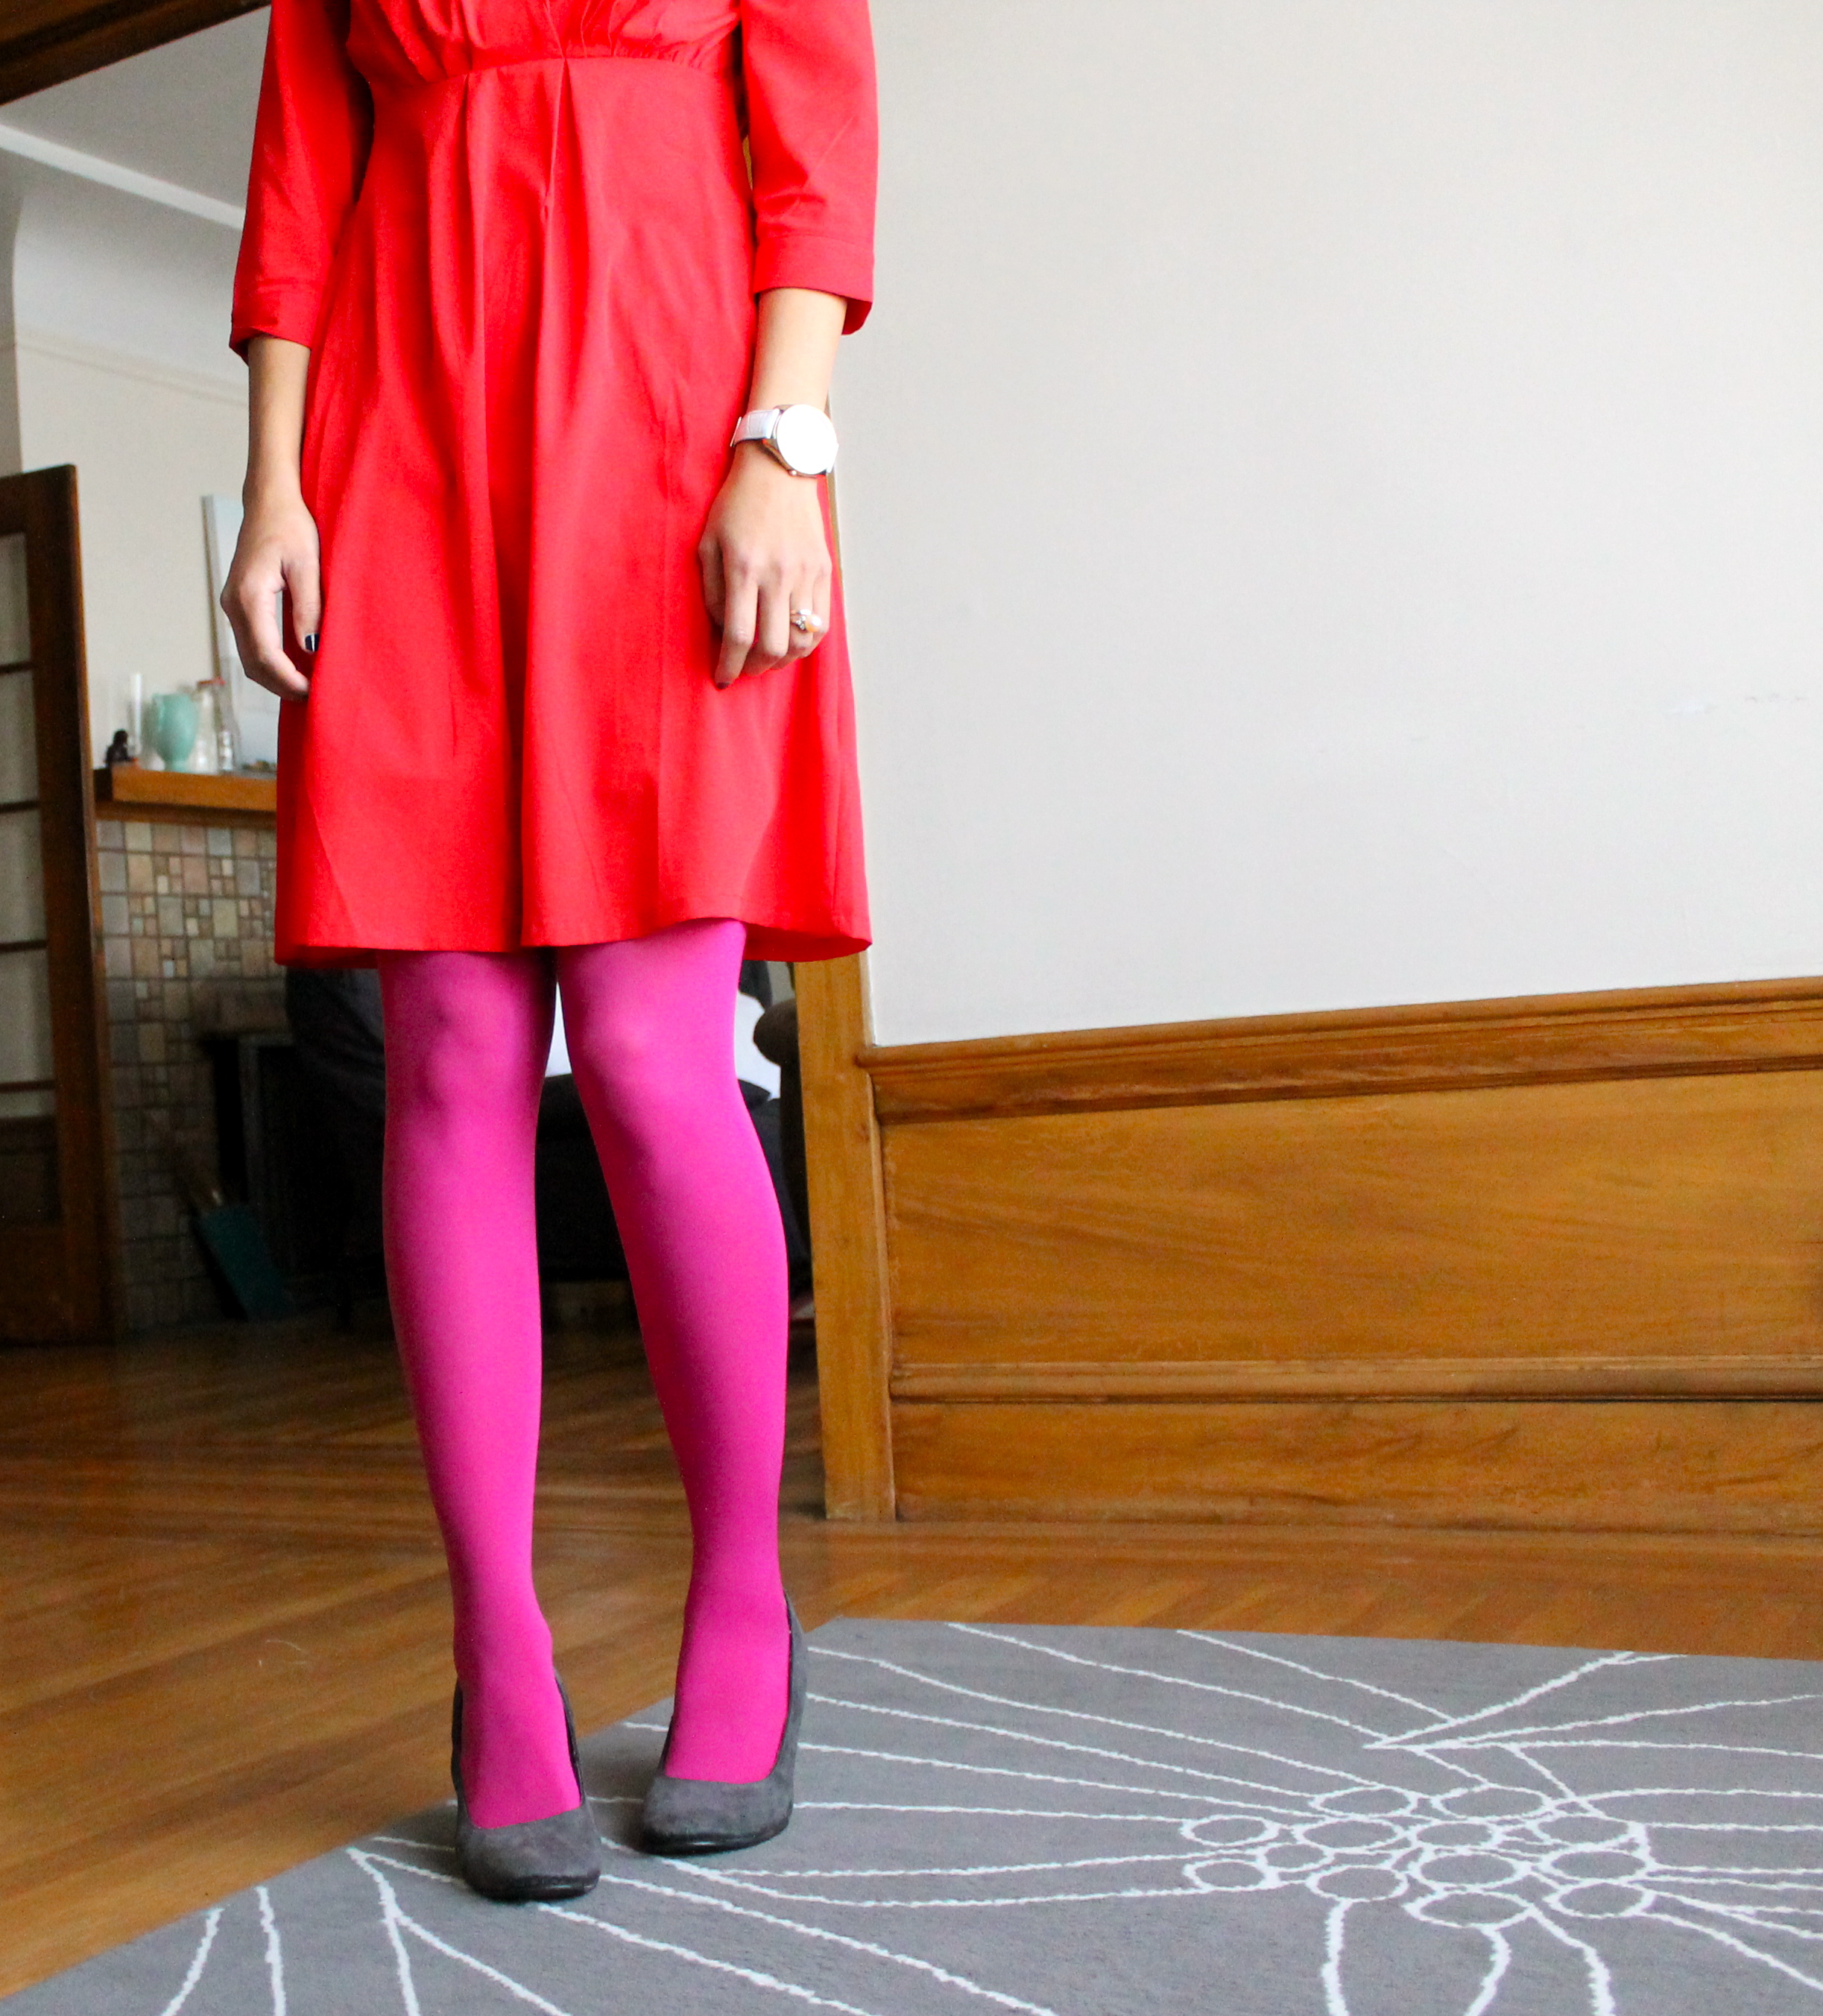 dress: in colored tights